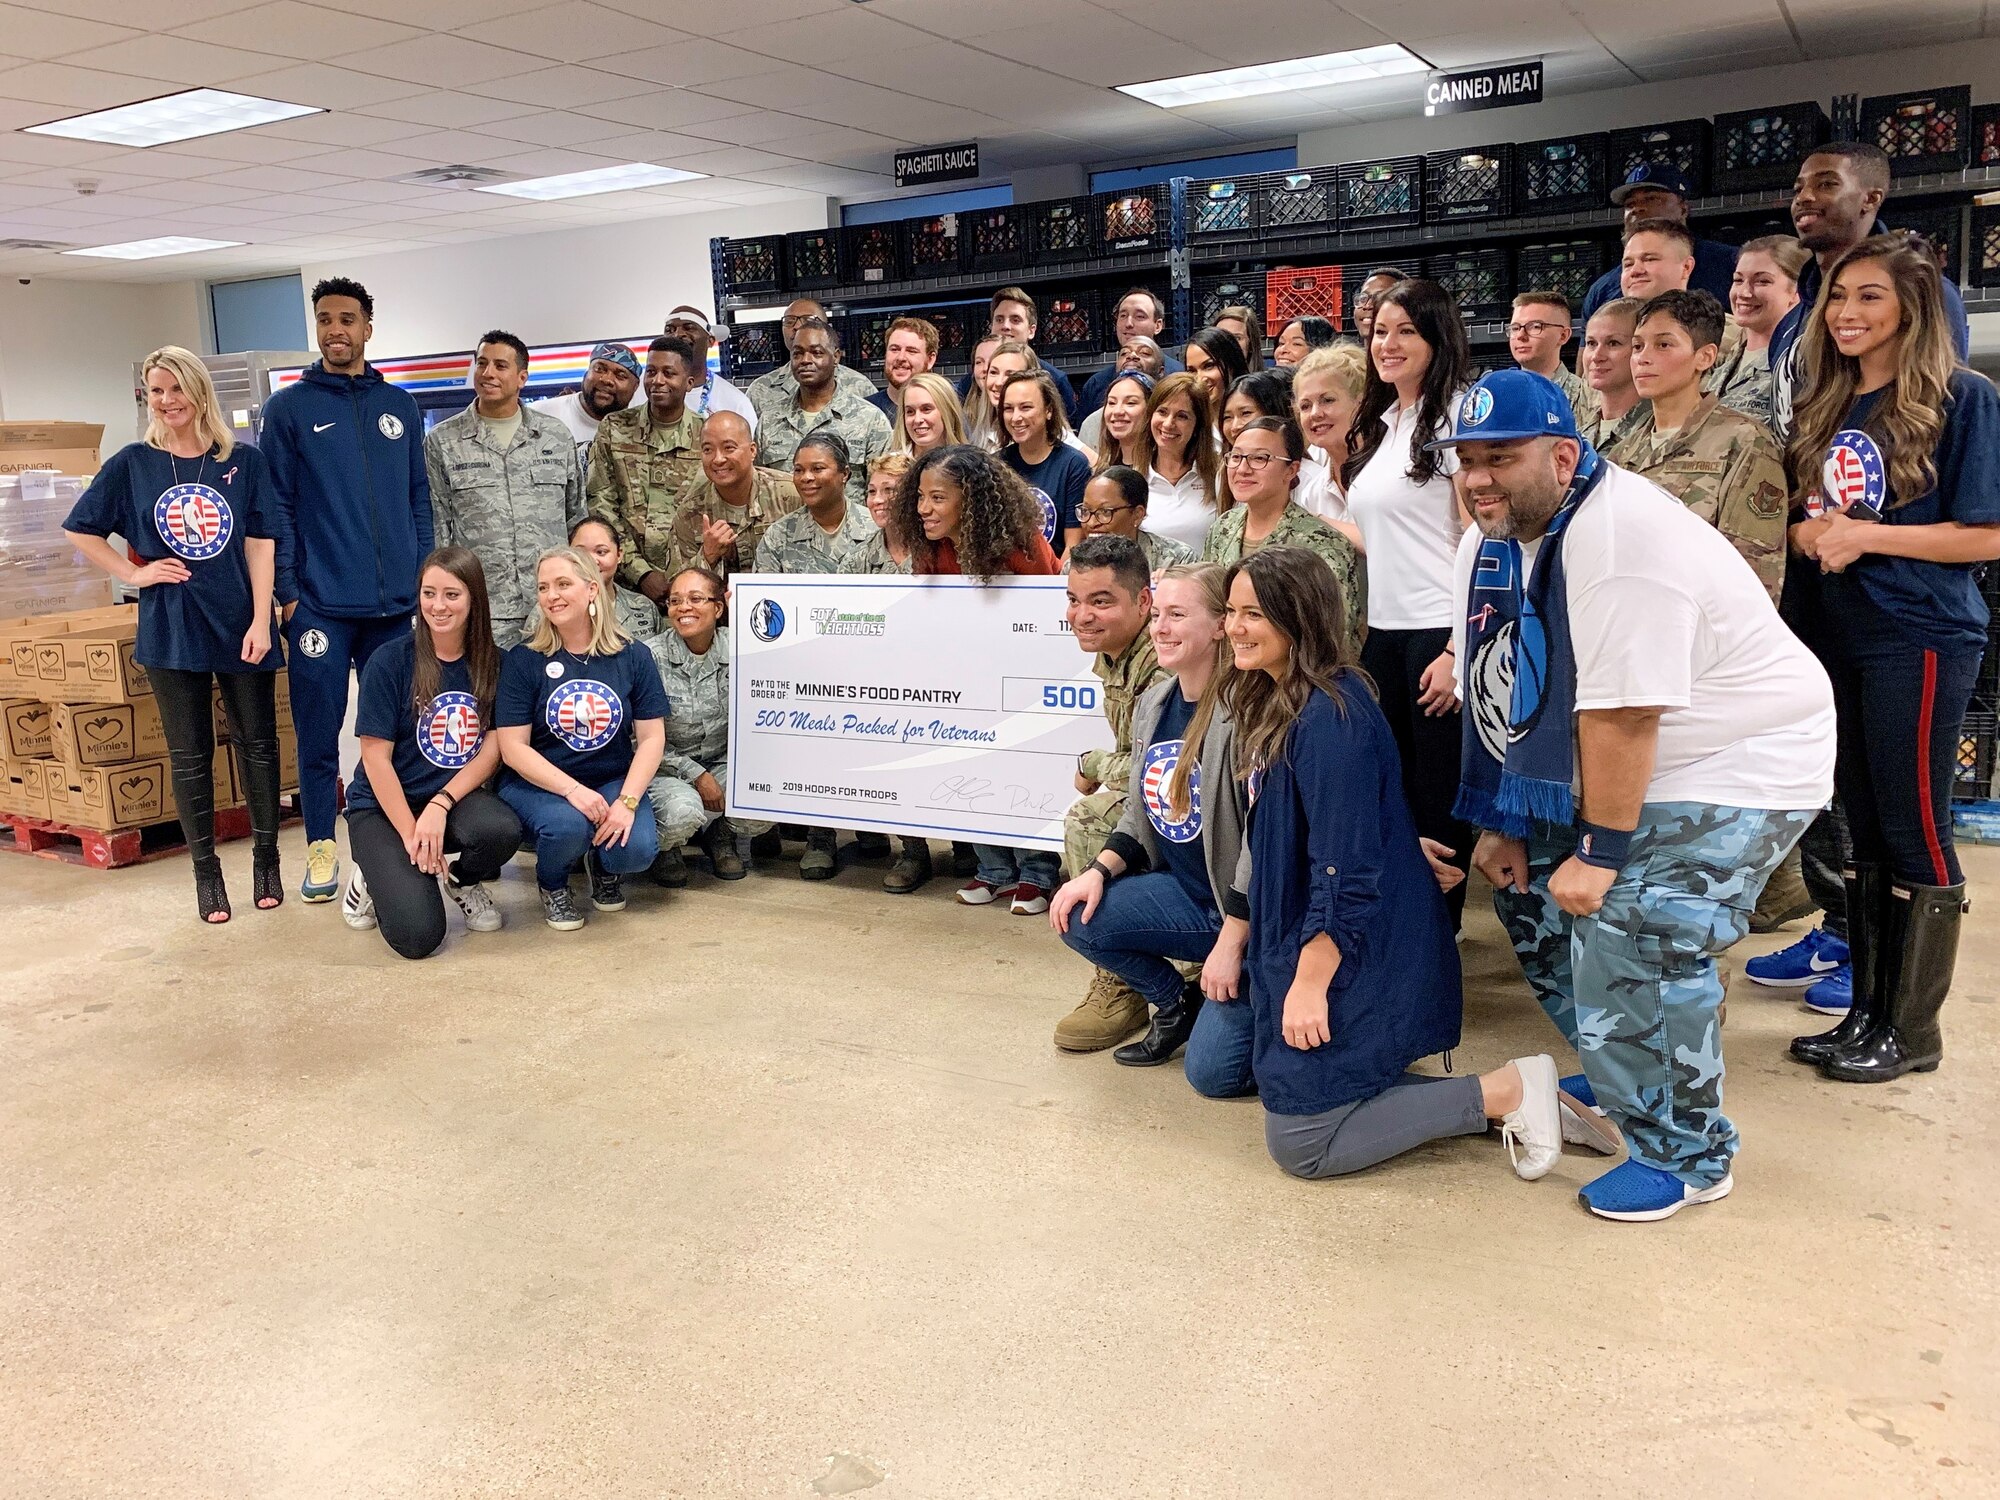 Team Fort Worth members pose with Dallas Mavericks players, team representatives and SOTA Weight loss volunteers as Minnie’s Food Pantry receives a "check" symbolizing the 500 meals that are being donated from the Dallas Mavericks, SOTA and the military to be used toward providing local veterans with food items and supplies. Hoops for Troops: Commitment to Service is a DoD annual initiative where the military and NBA teams from across the country partner together to serve their surrounding communities. (U.S. Air Force photo by Capt. Jessica Gross)